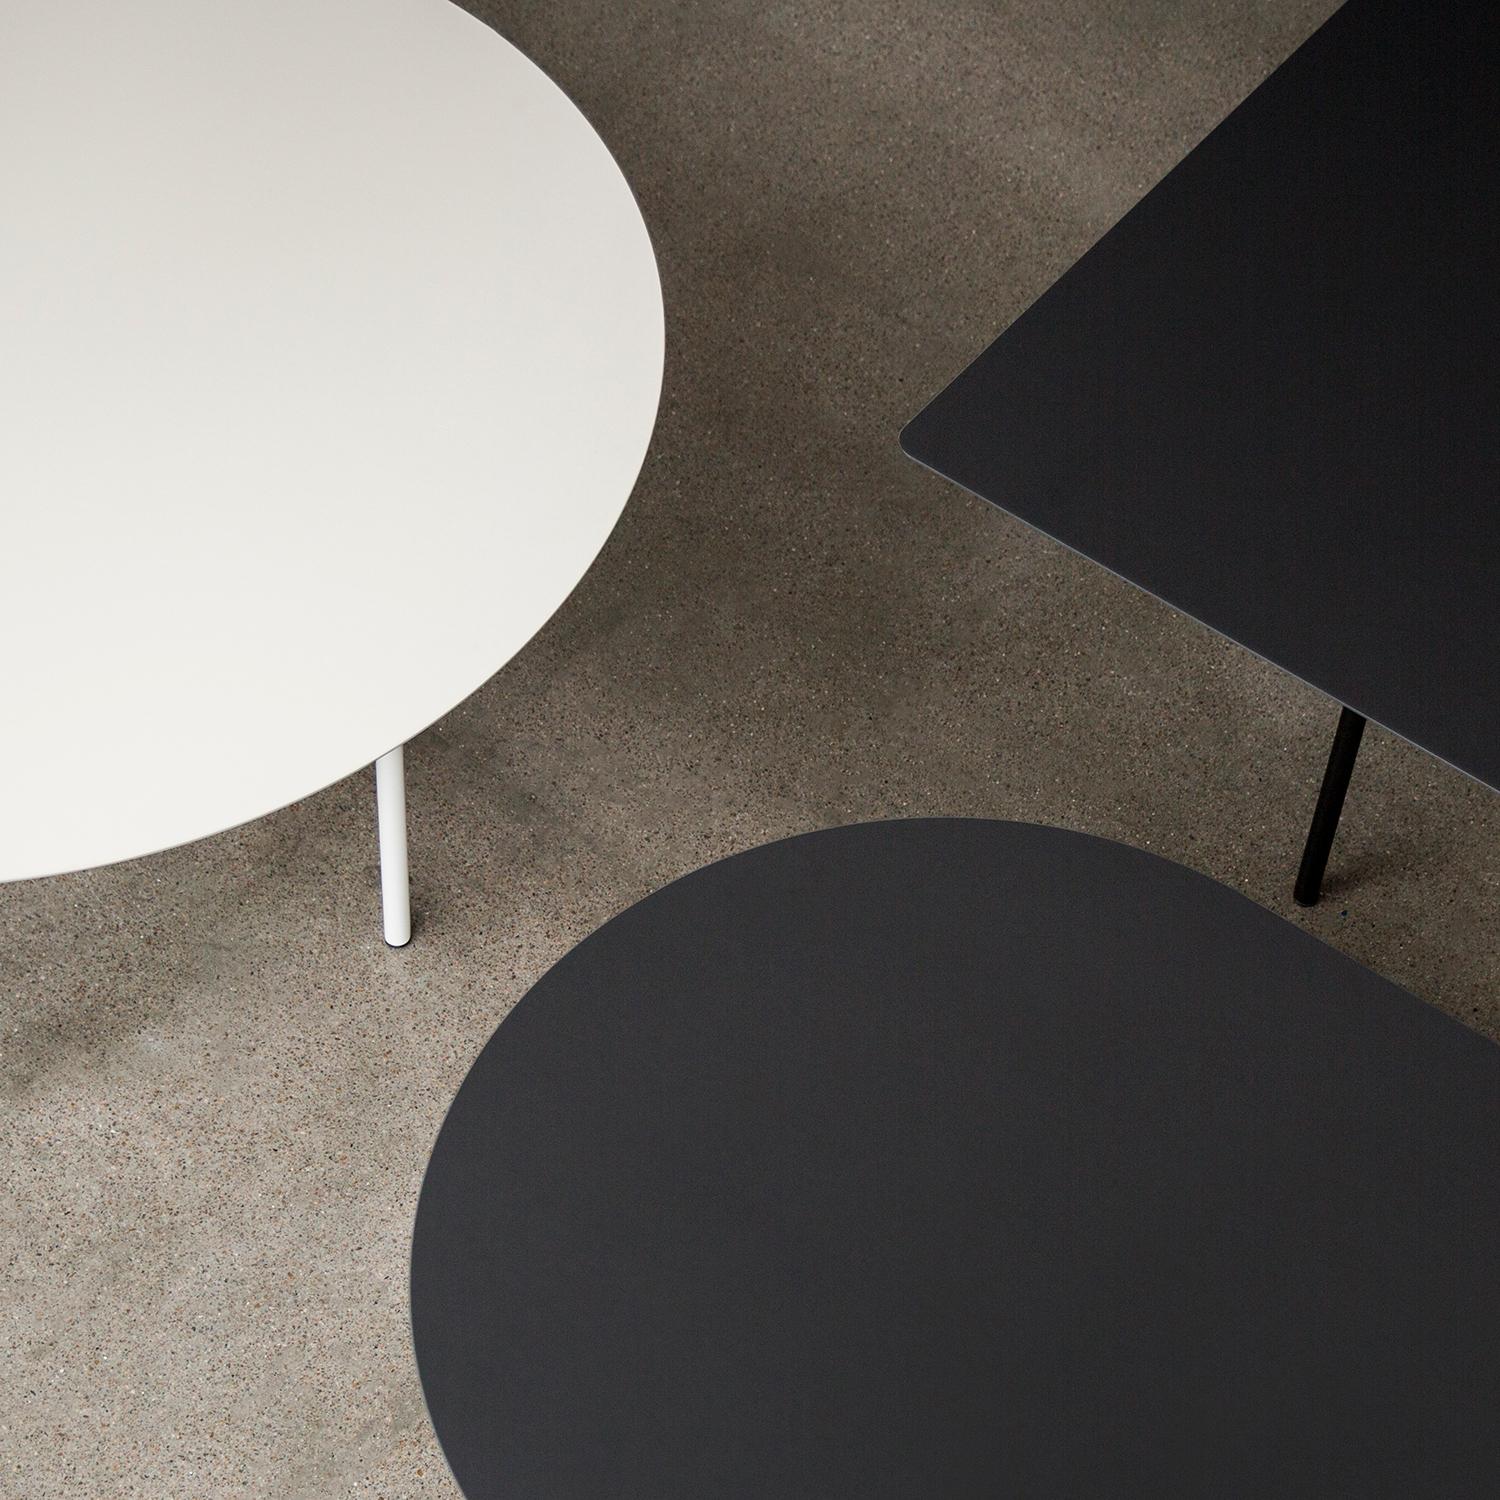 The Snaregade Table was originally built for the home of MENU founder Bjarne Hansen, answering the question: what does the founder of a furniture company need in his dining room? He needed a table that was efficient in its use of space, visually